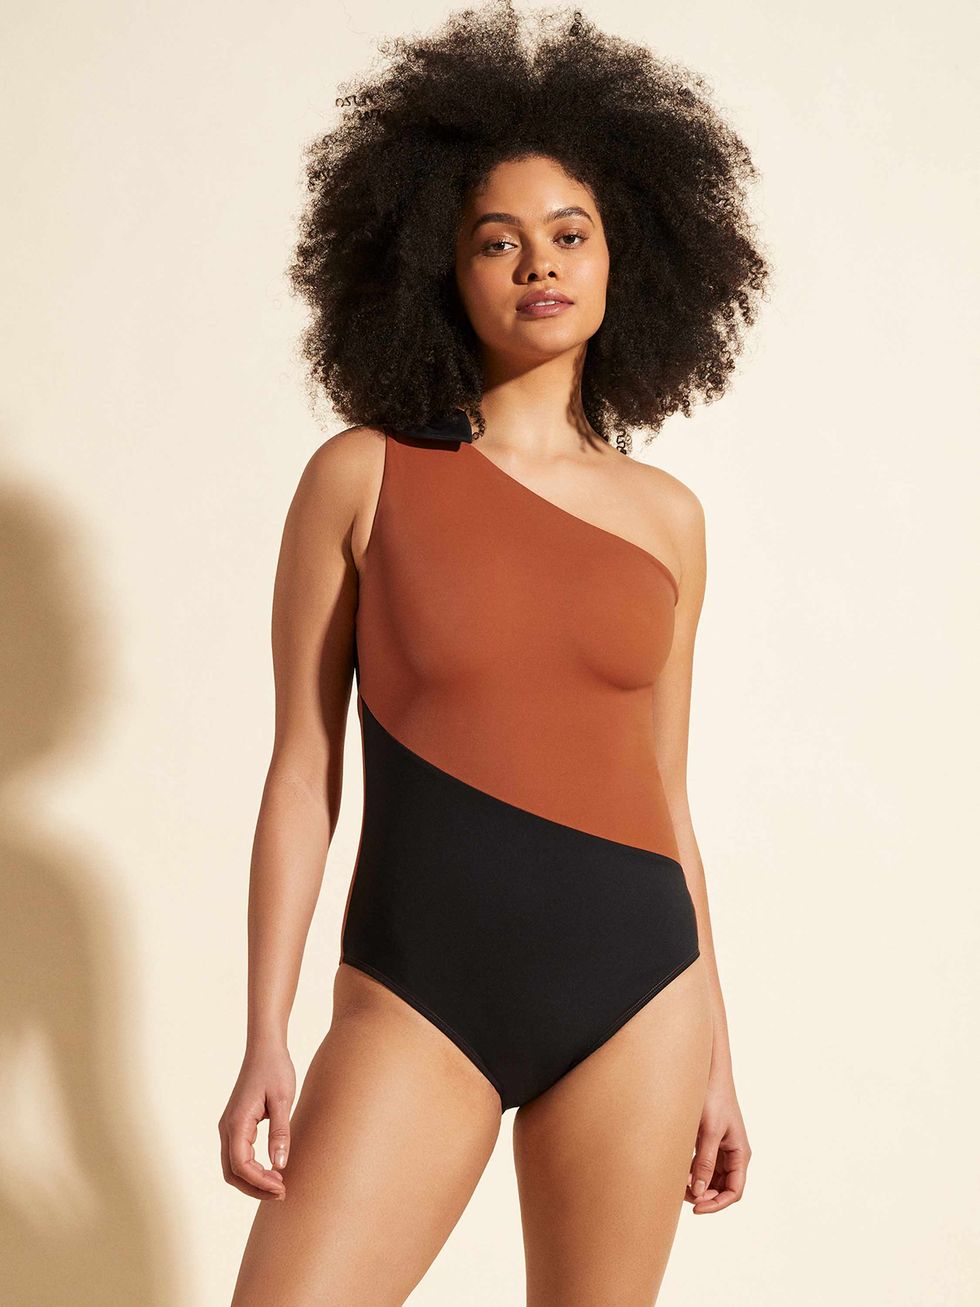 Stylest Swimsuit Brand Takes the Stress Out of Swimwear